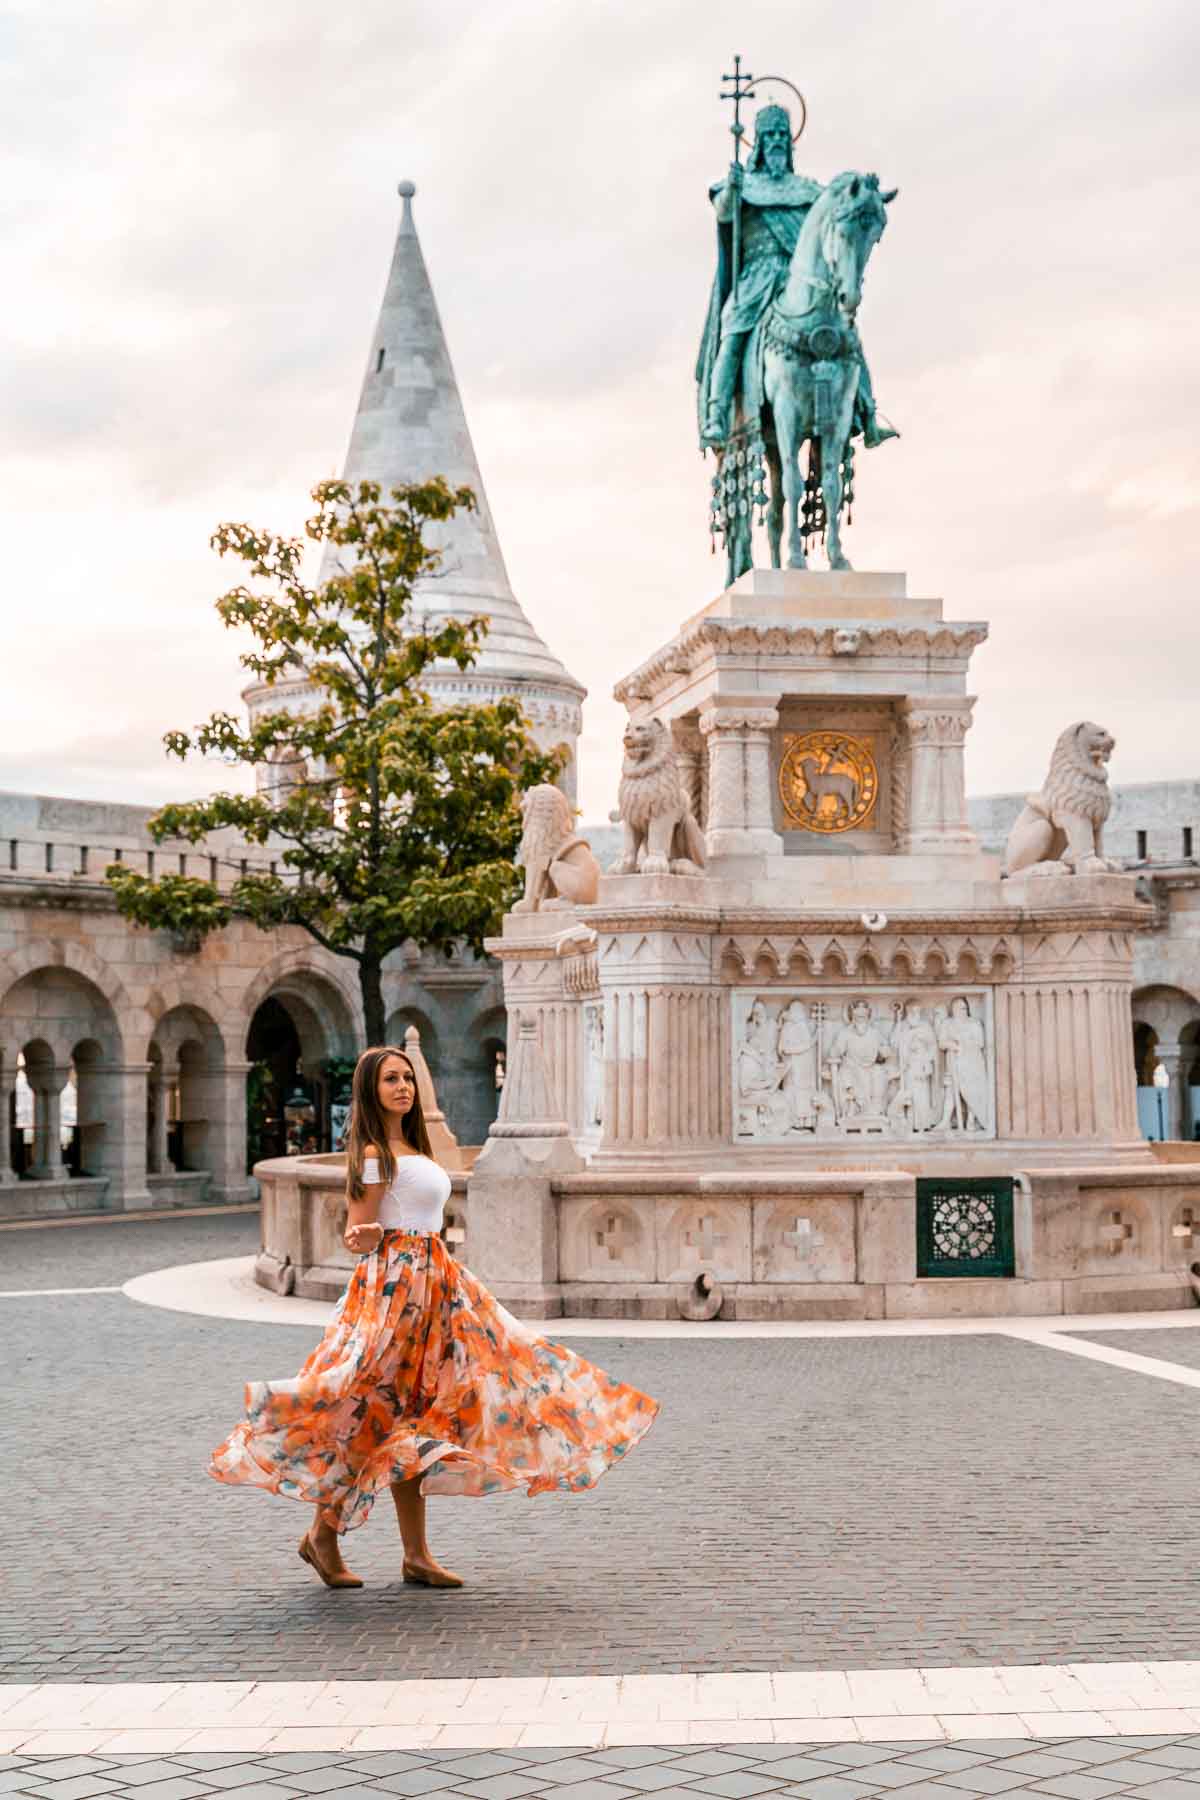 Girl in an orange skirt twirling in front of a statue at Fisherman's Bastion in Budapest